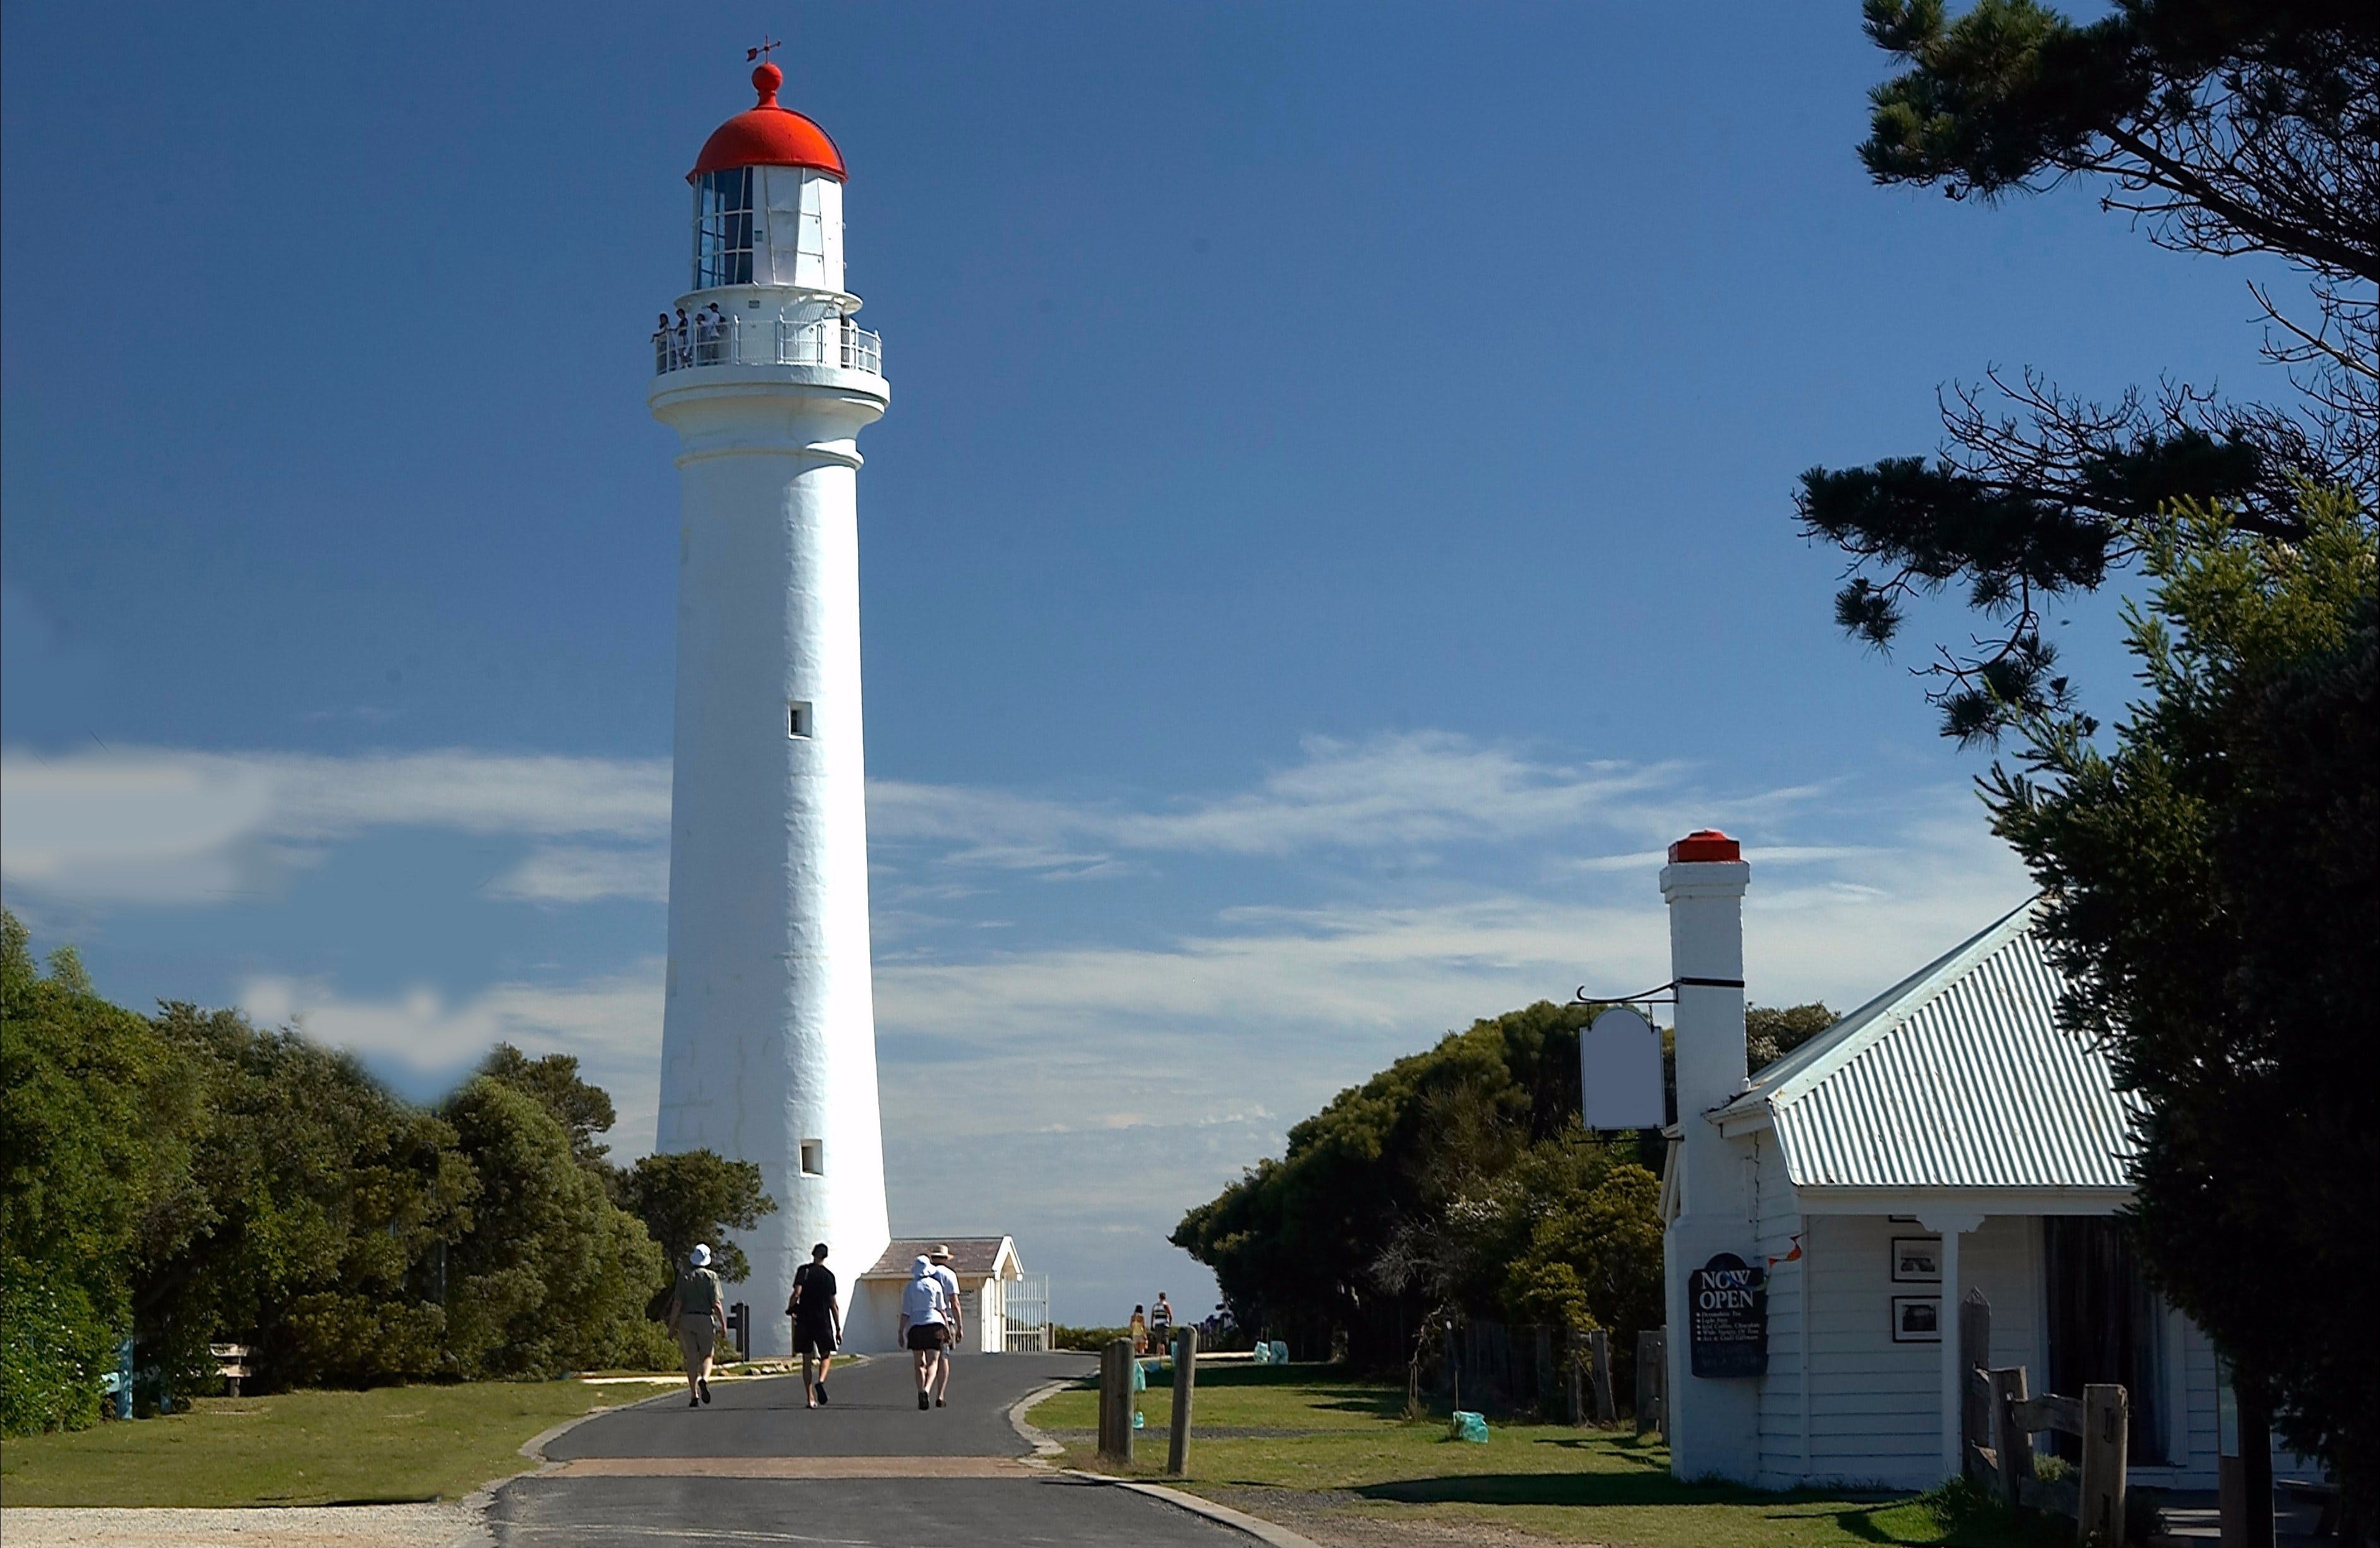 Split Point Lighthouse Tours Aireys Inlet - Nambucca Heads Accommodation